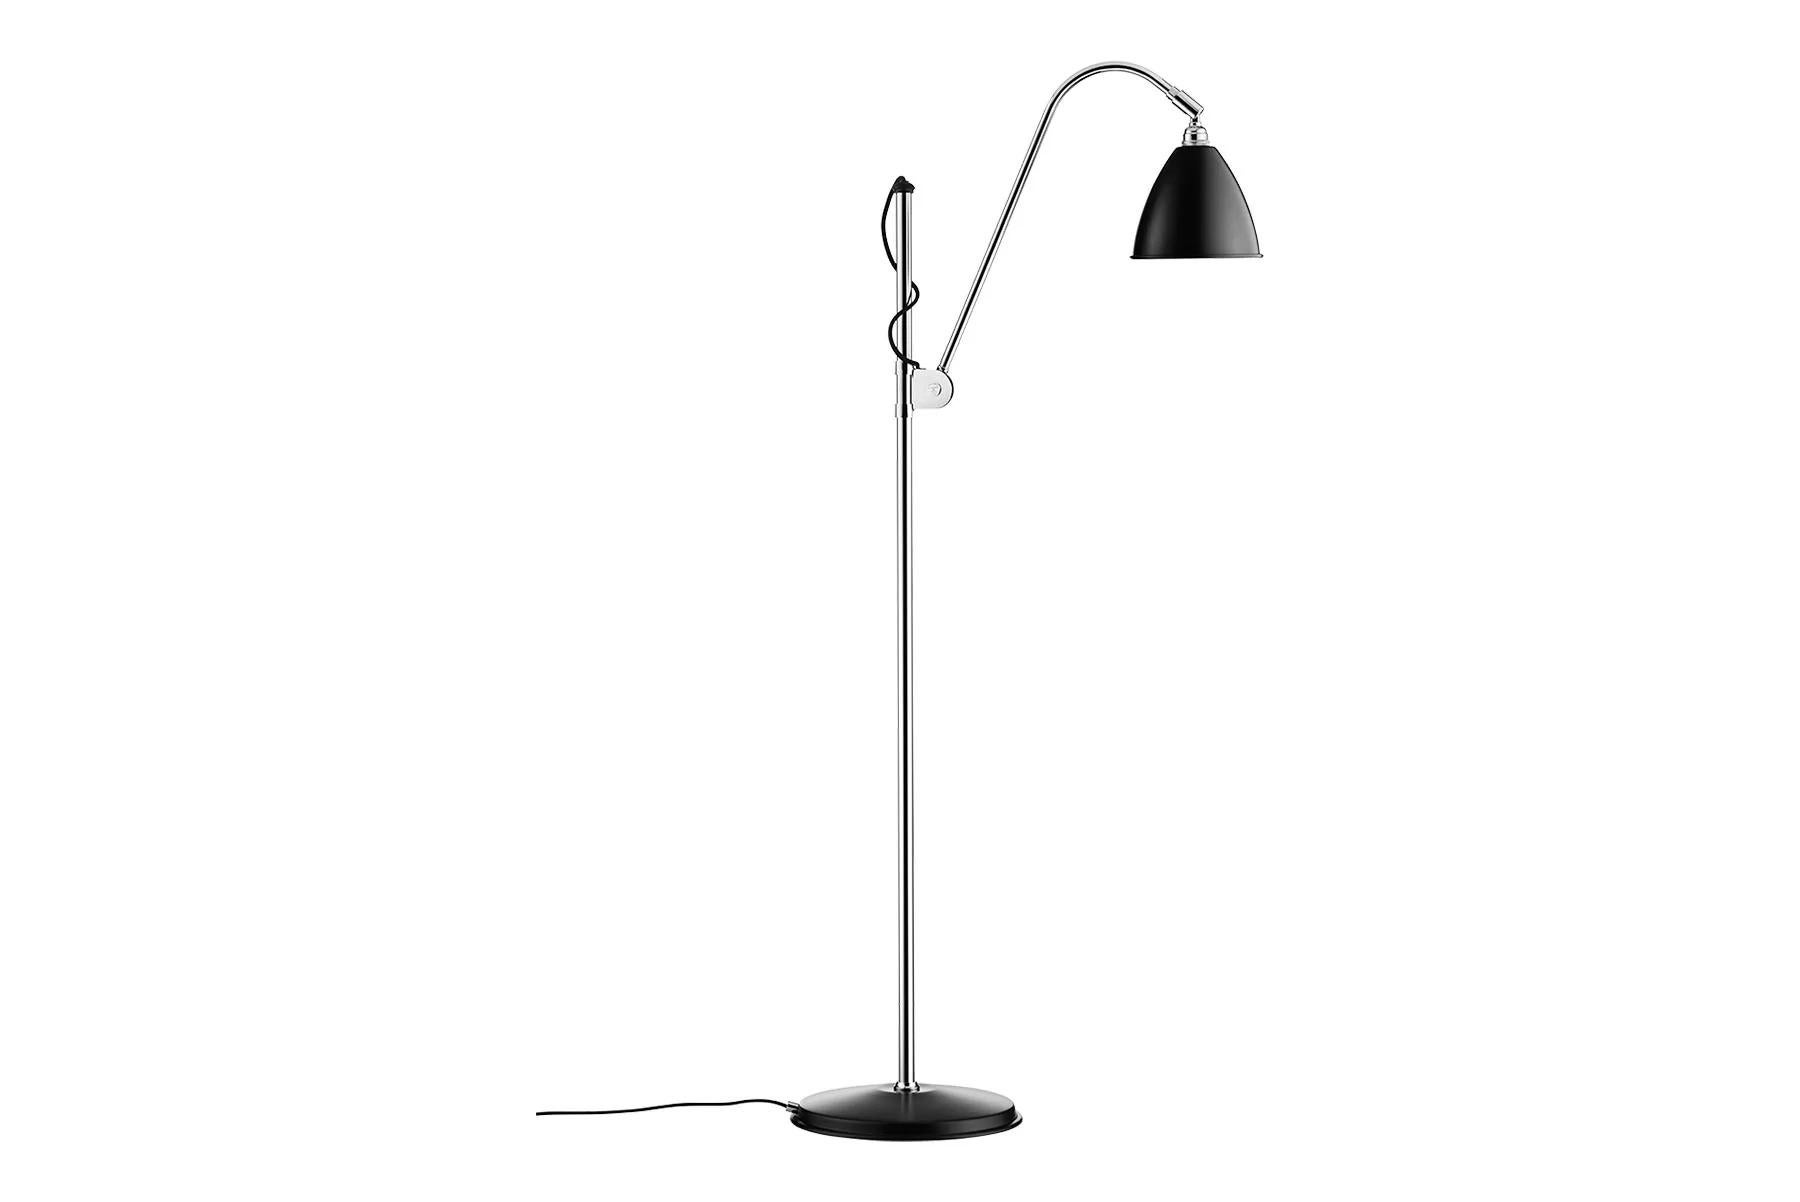 The Bestlite BL3 floor lamp in two sizes was designed in 1930 by Robert Dudley Best, a British designer highly influenced by Bauhaus. Its clean lines and elegant expression are combined with great functionality of the adjustable arm, both horizontal